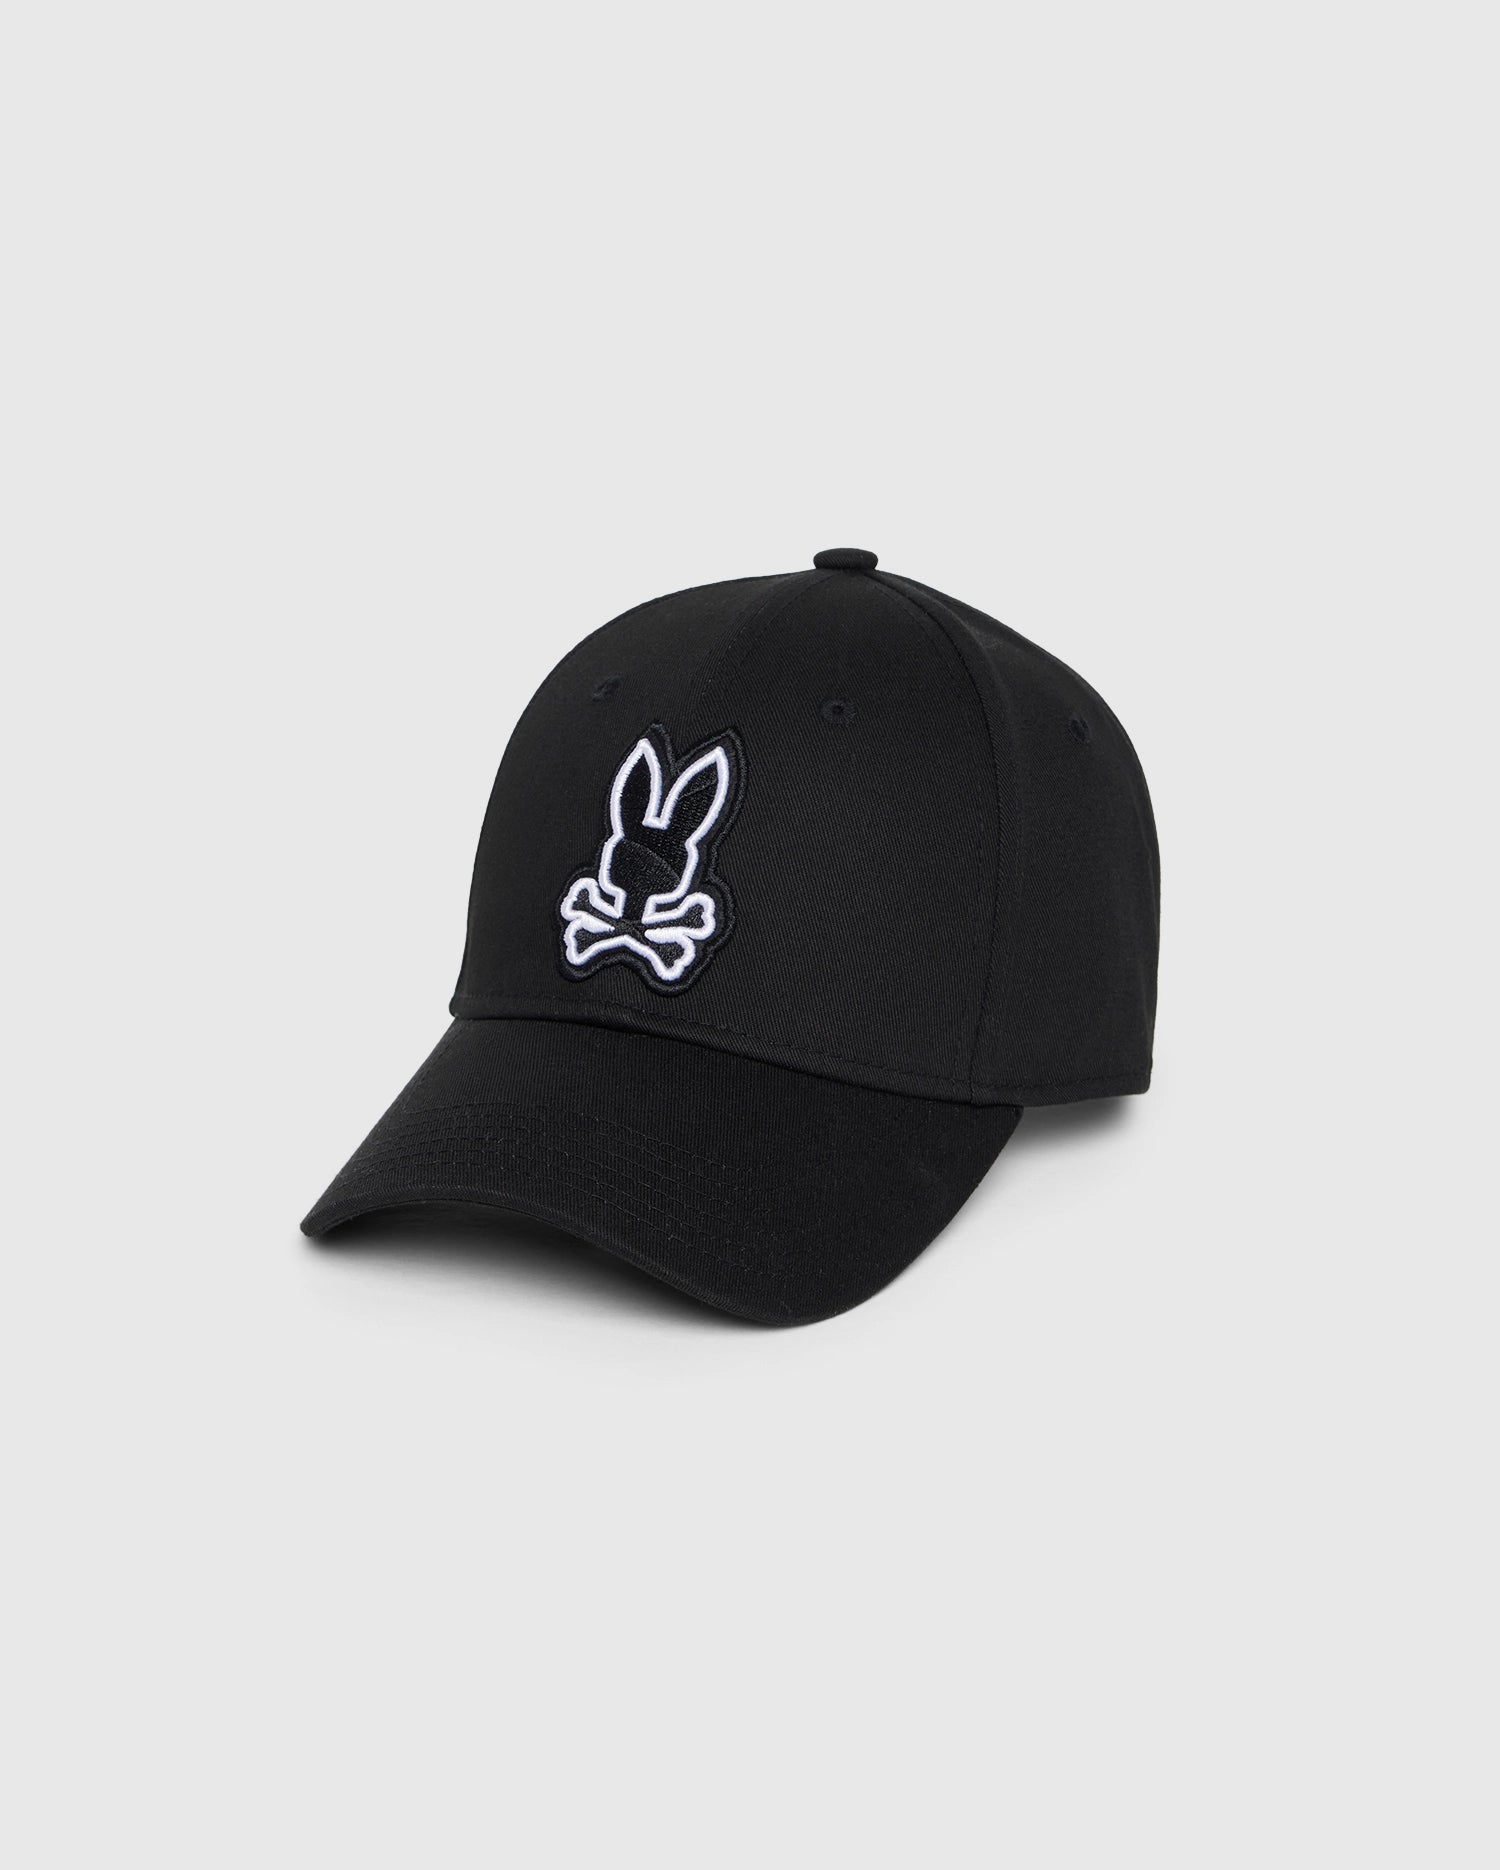 A black men's Lenox baseball cap featuring an embroidered white outline of a bunny head with crossed bones underneath on the front. Made from 100% cotton, it has a curved brim and an adjustable flip-clap fastening at the back. The Psycho Bunny MENS LENOX BASEBALL CAP - B6A122B2HT offers both style and comfort for everyday wear.